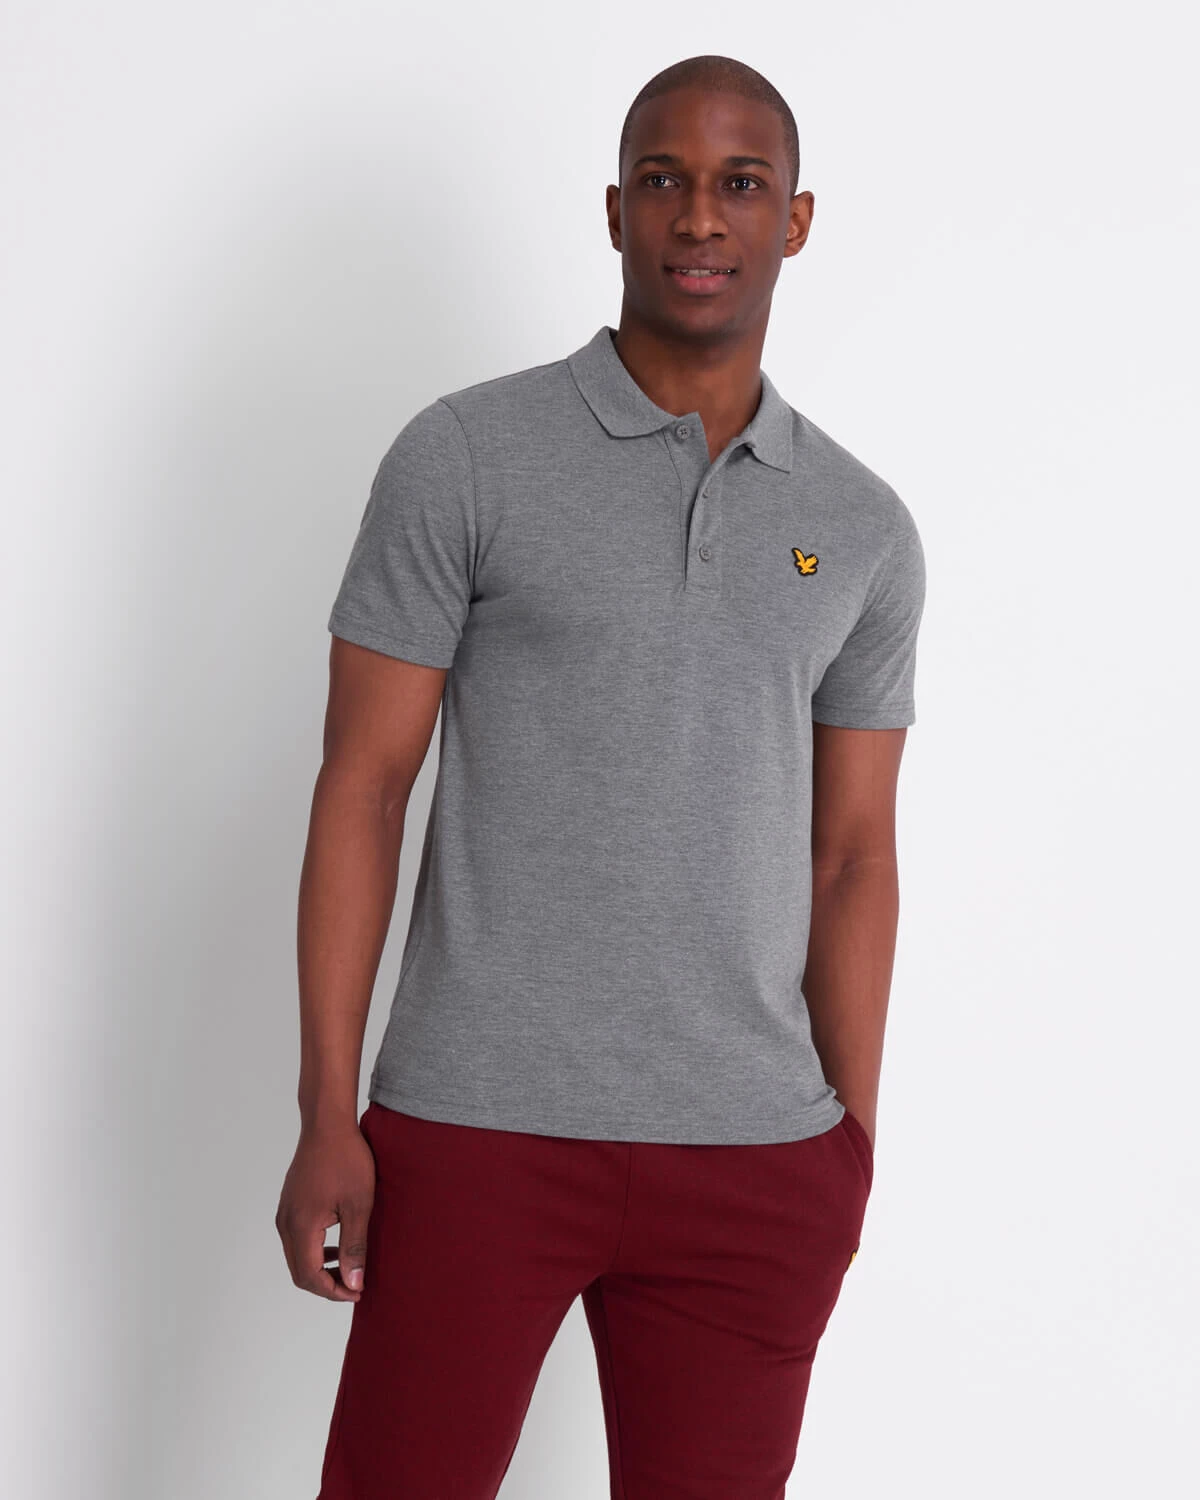 Lyle and Scott Sport SS Polo polo he